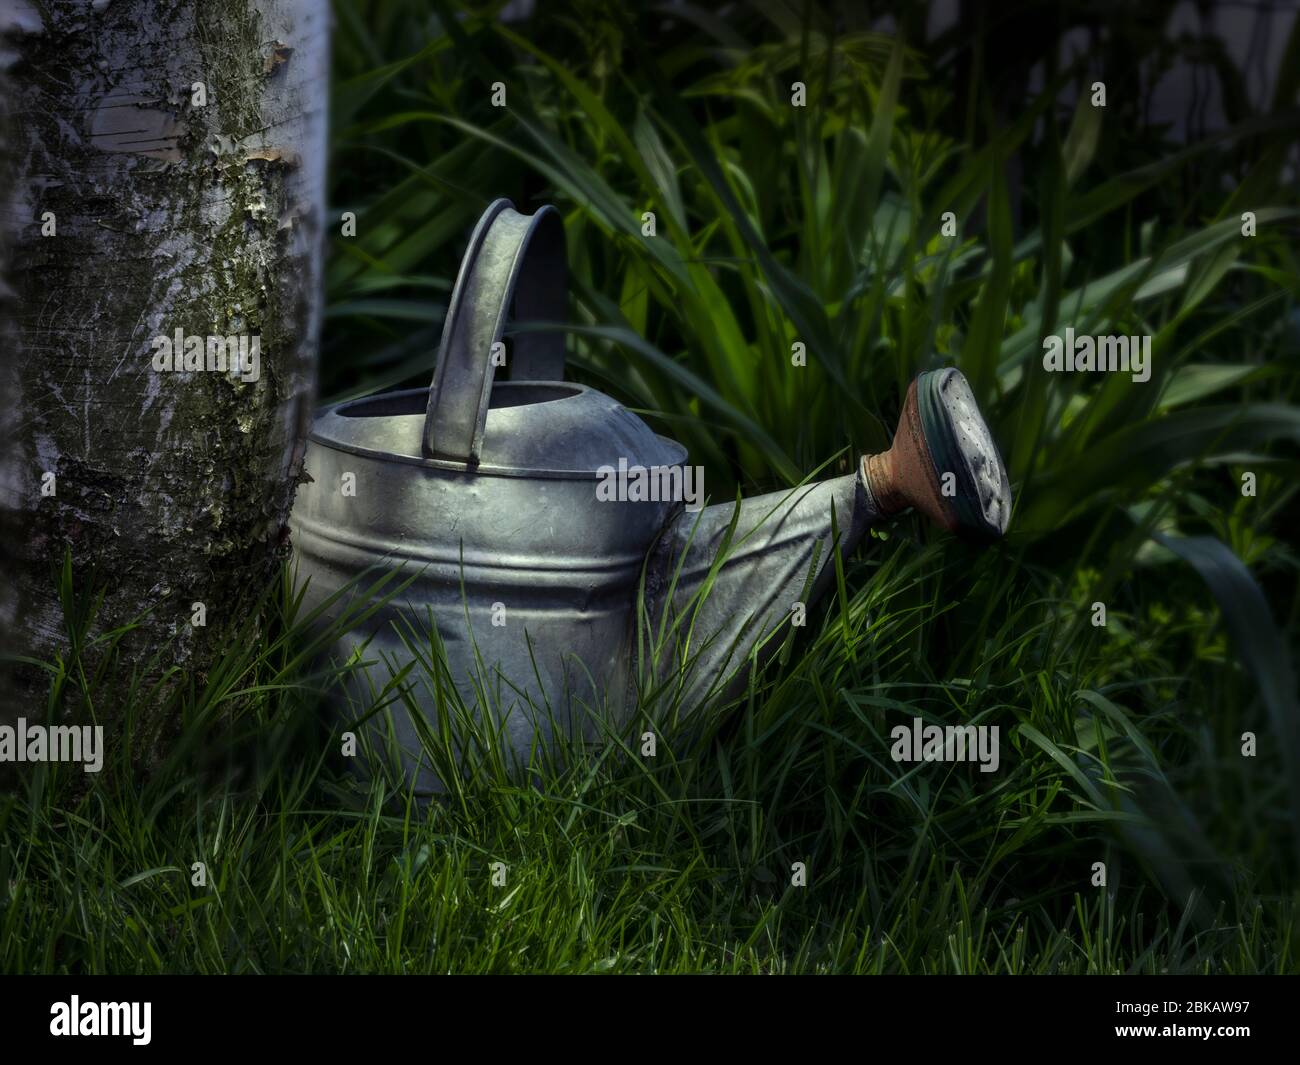 Antique watering can in garden at night Stock Photo